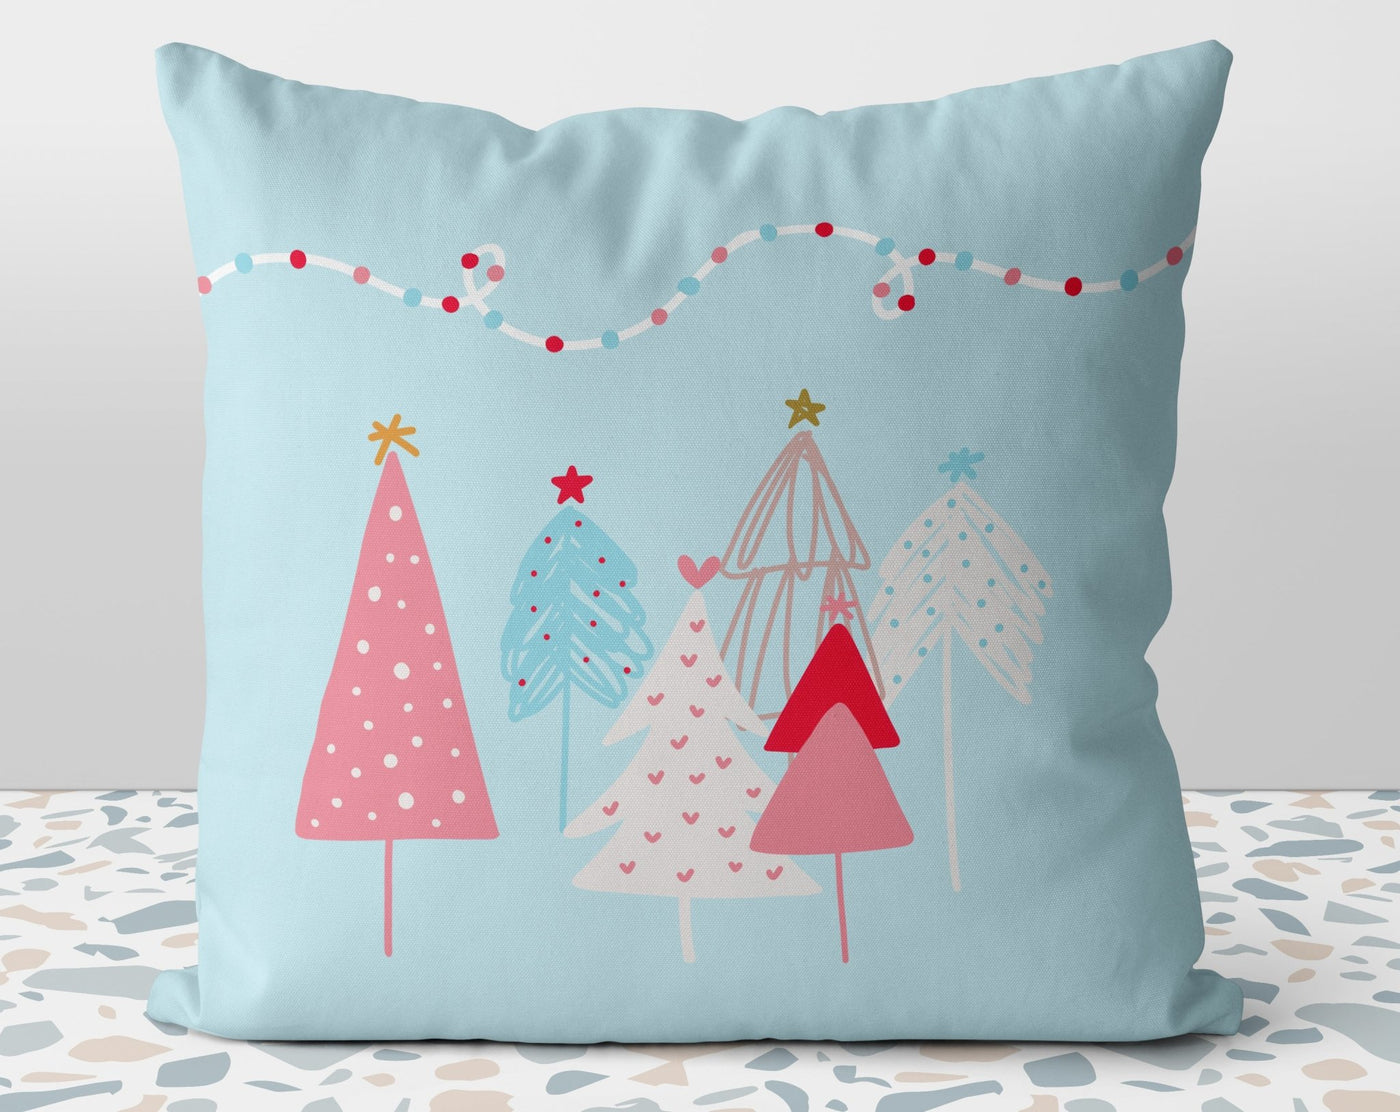 Christmas Pastel Whimsical Trees Seasons Greetings Blue Pink Red Pillow Throw Cover